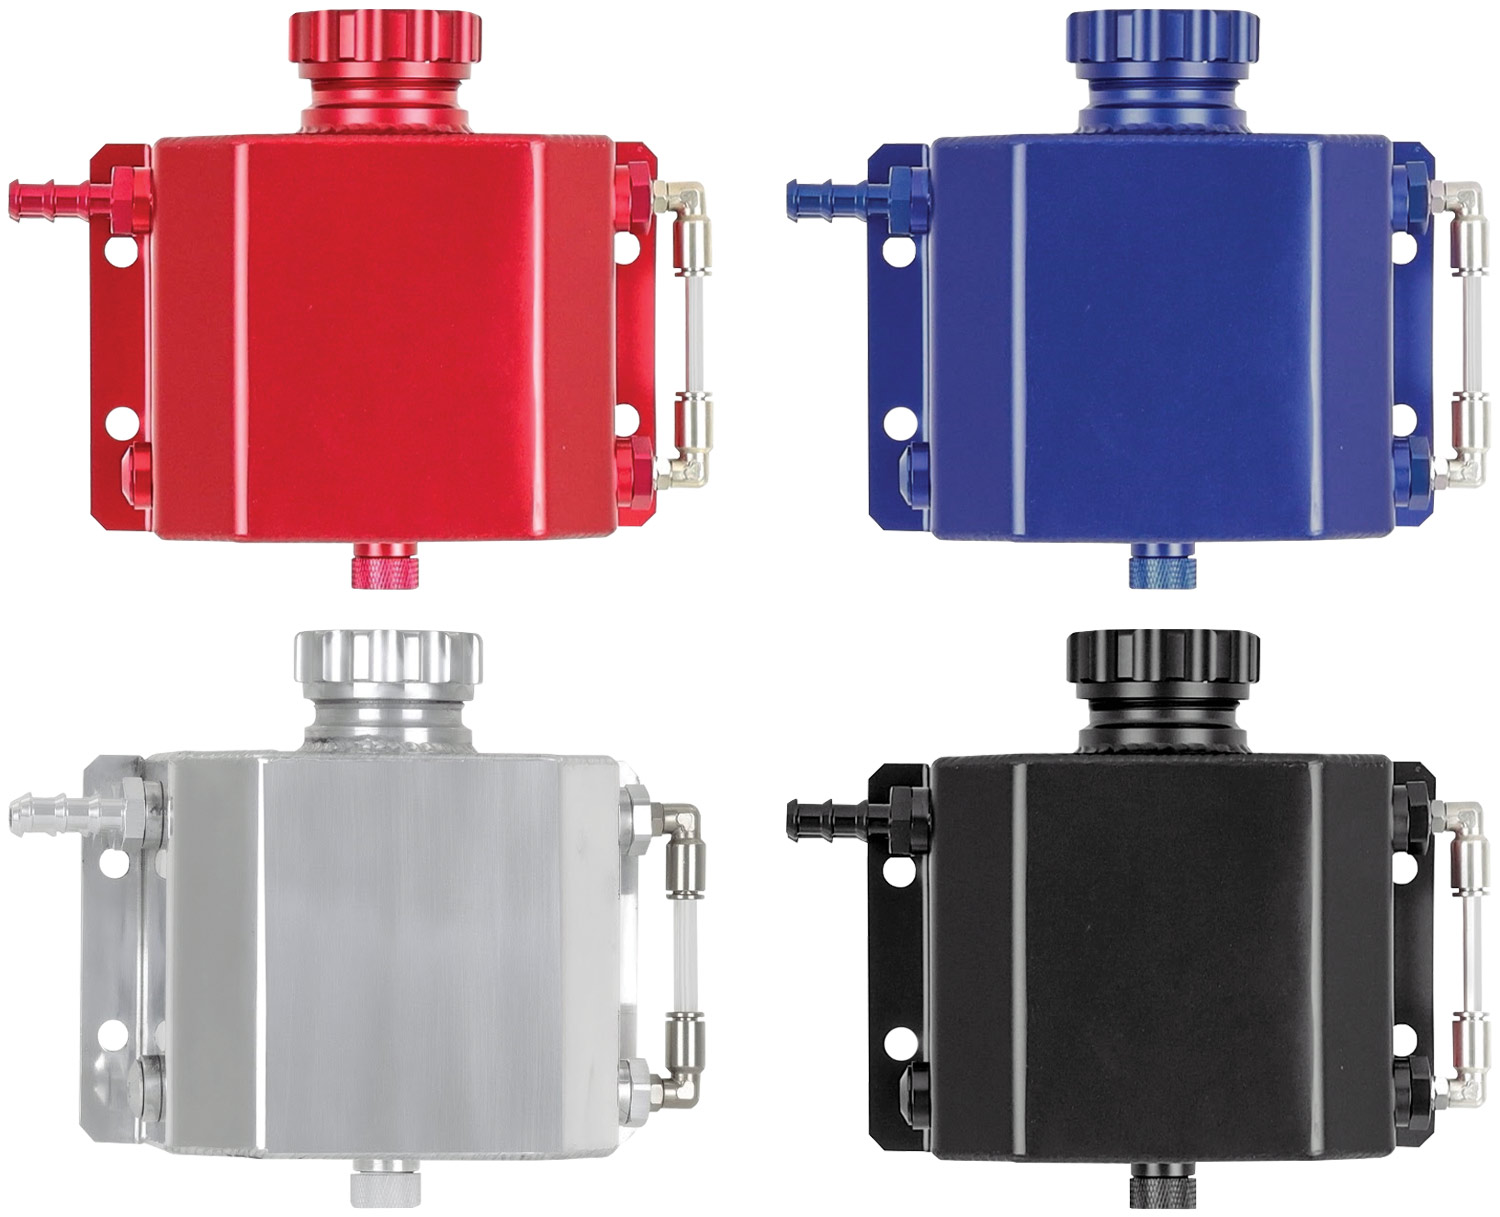 Mishimoto Universal Coolant Overflow Tanks in red, blue, white and black